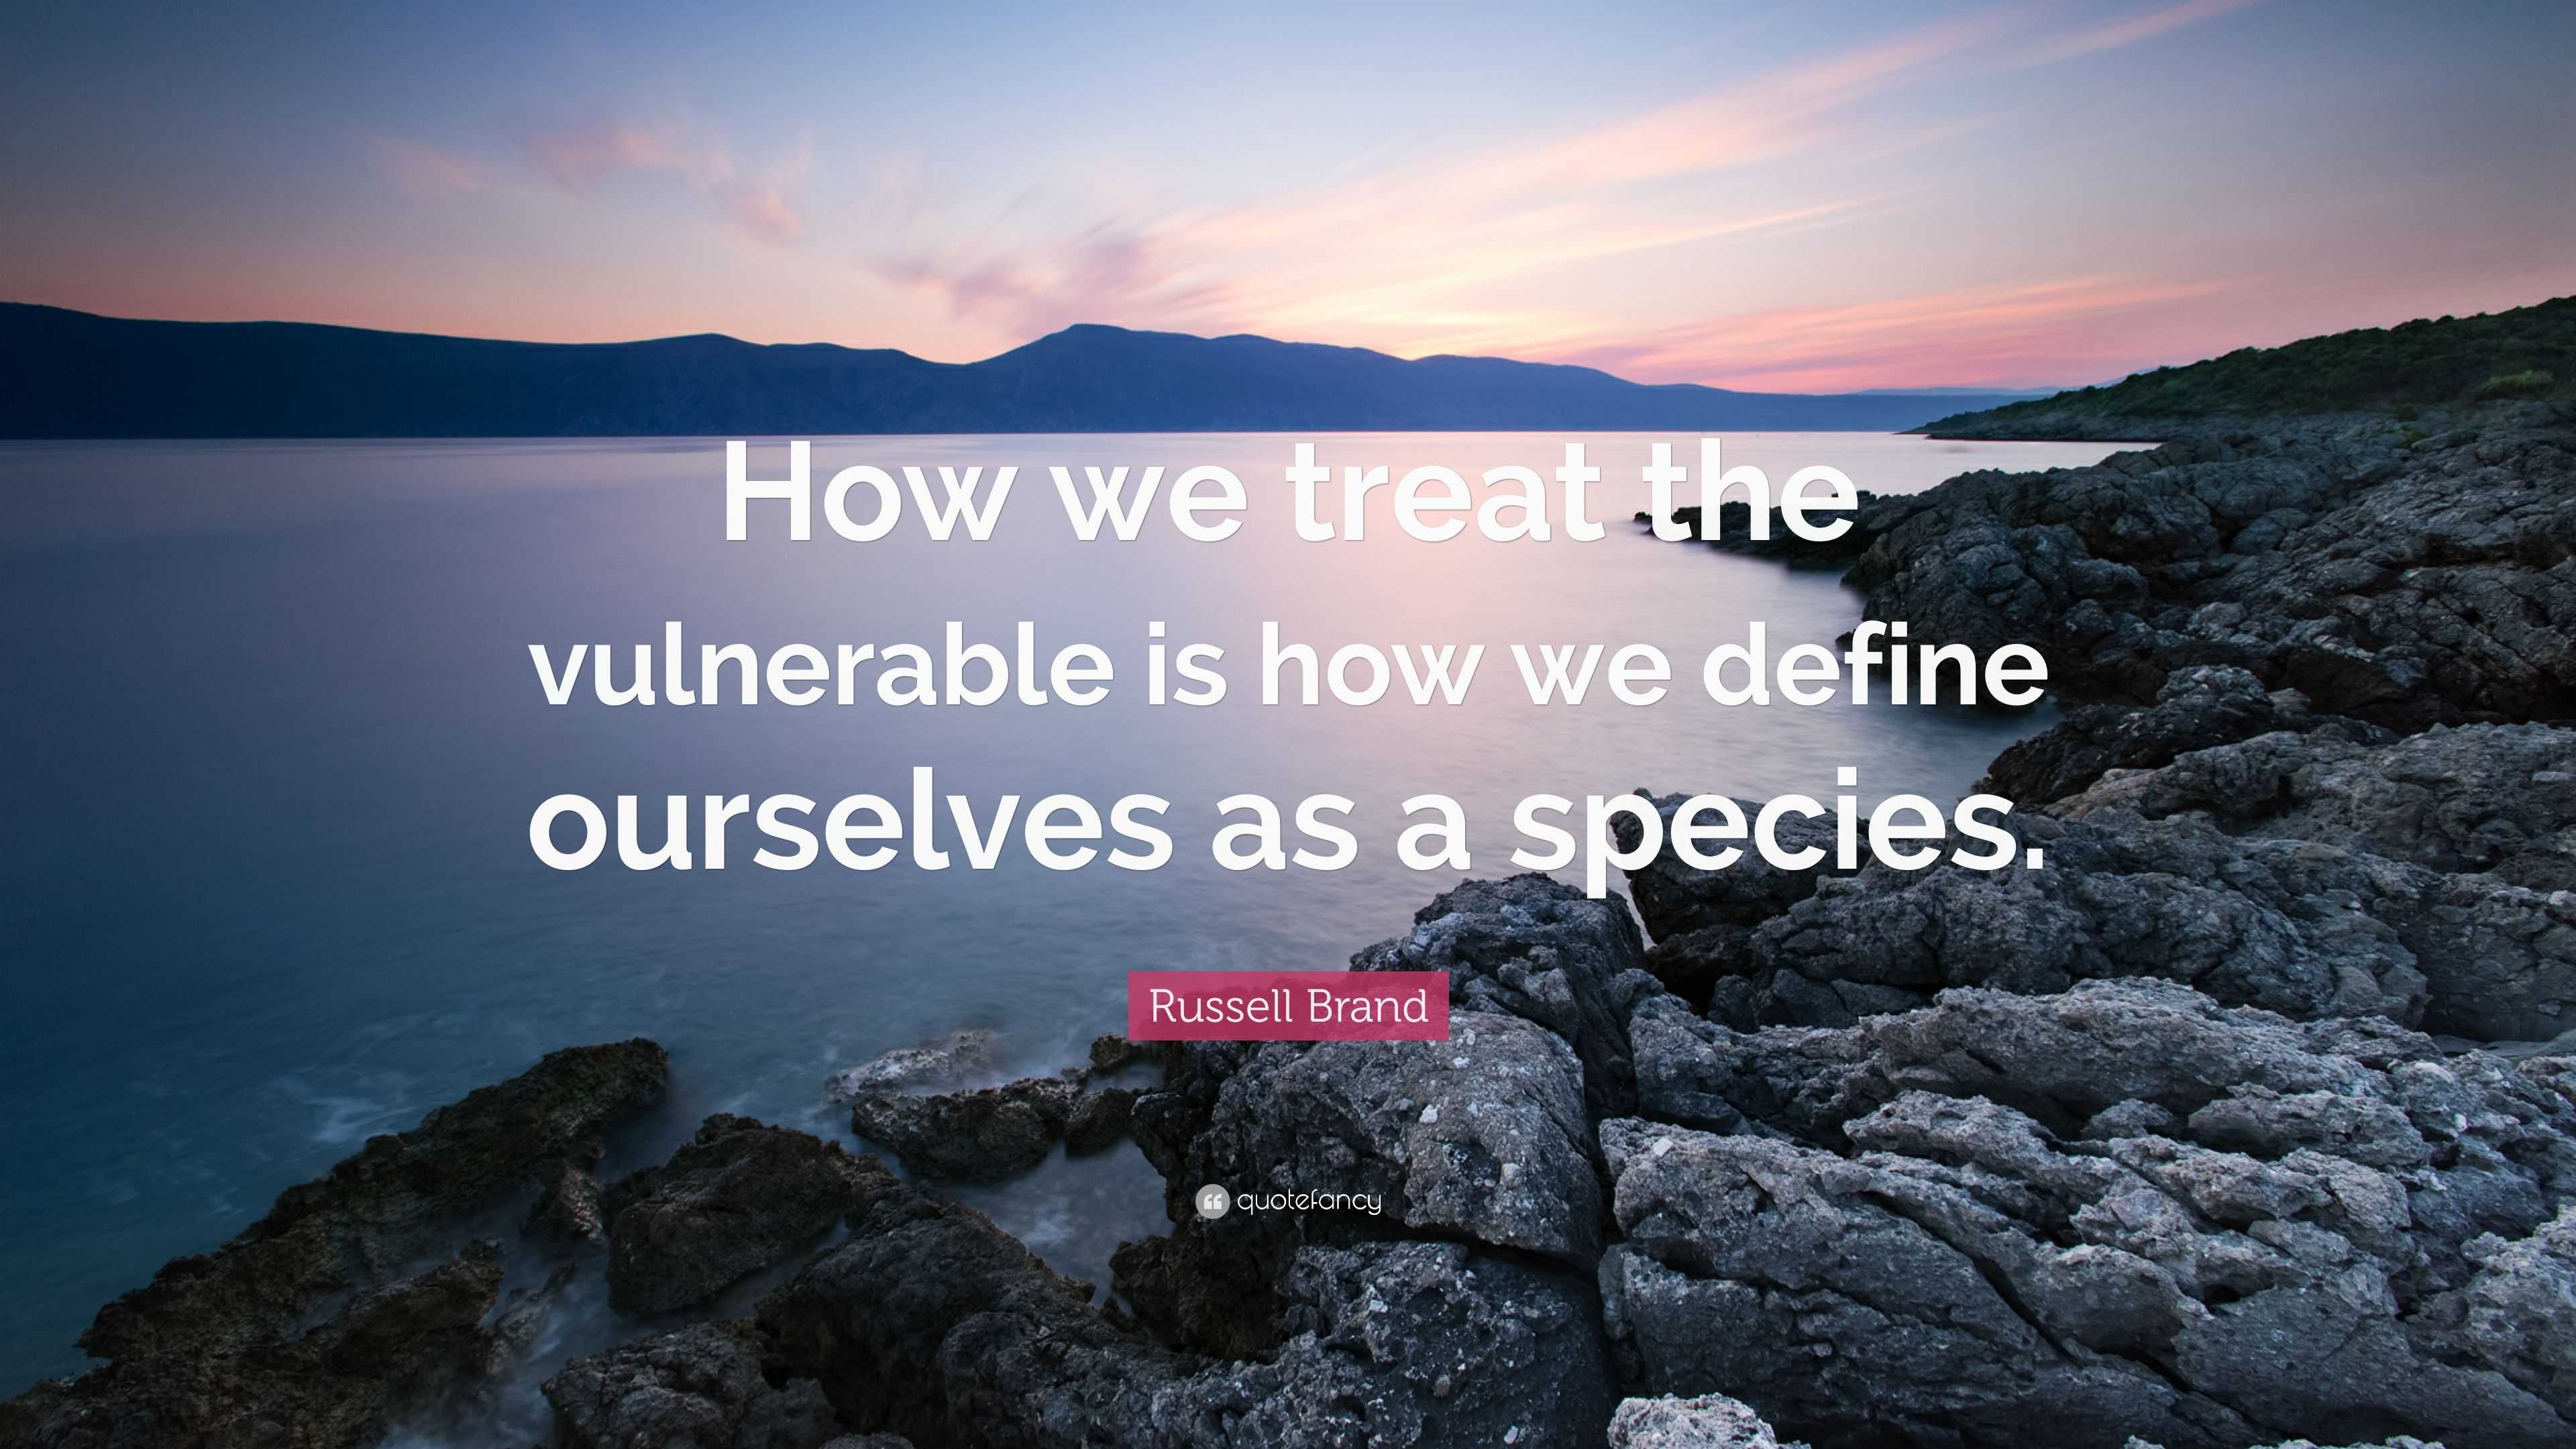 Russell Brand Quote: “How we treat the vulnerable is how we define ...